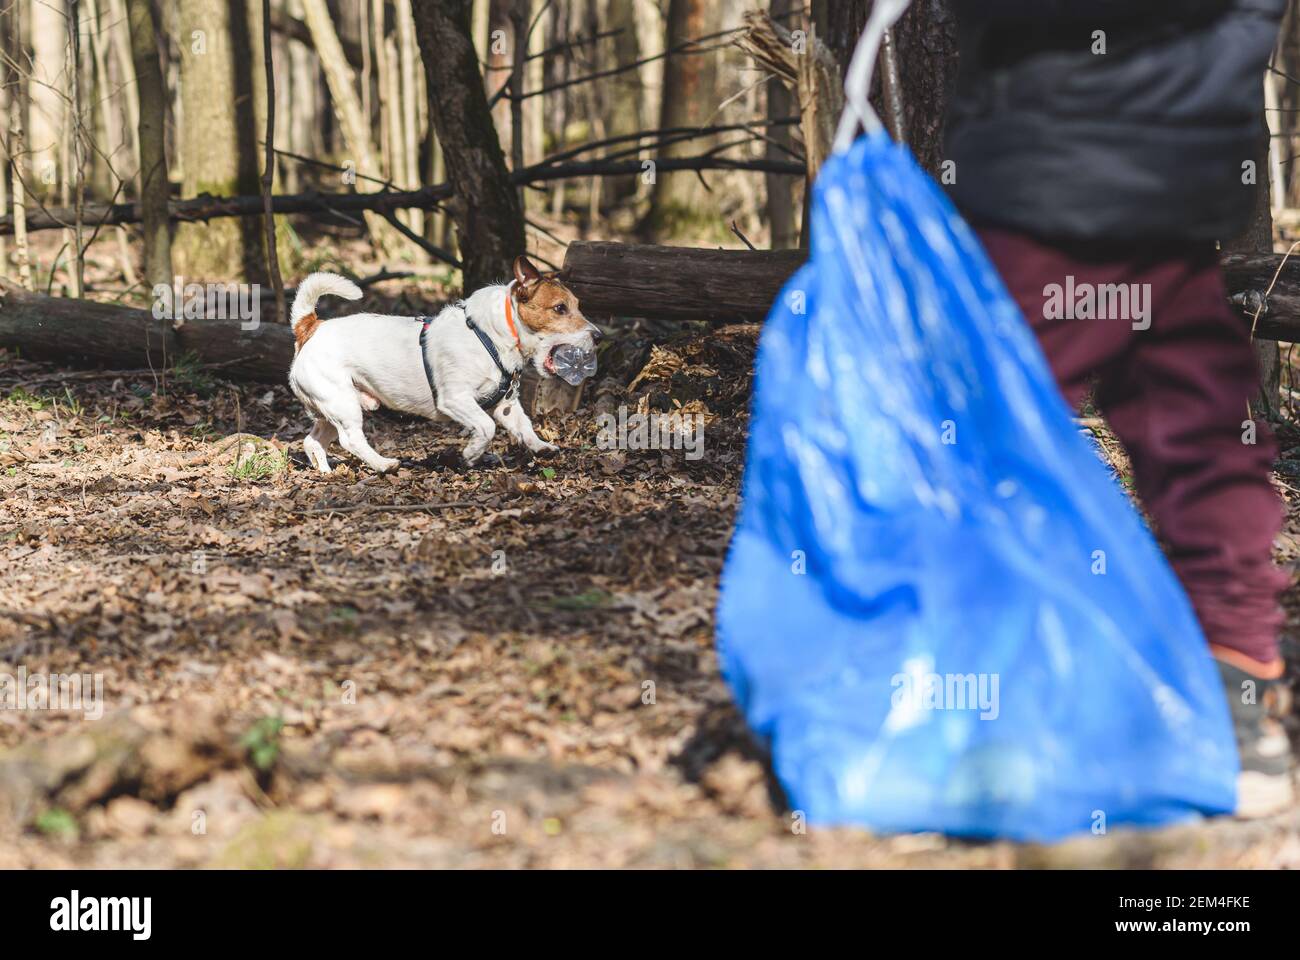 Earth day concept with kid and dog cleaning park gathering plastic bottles Stock Photo